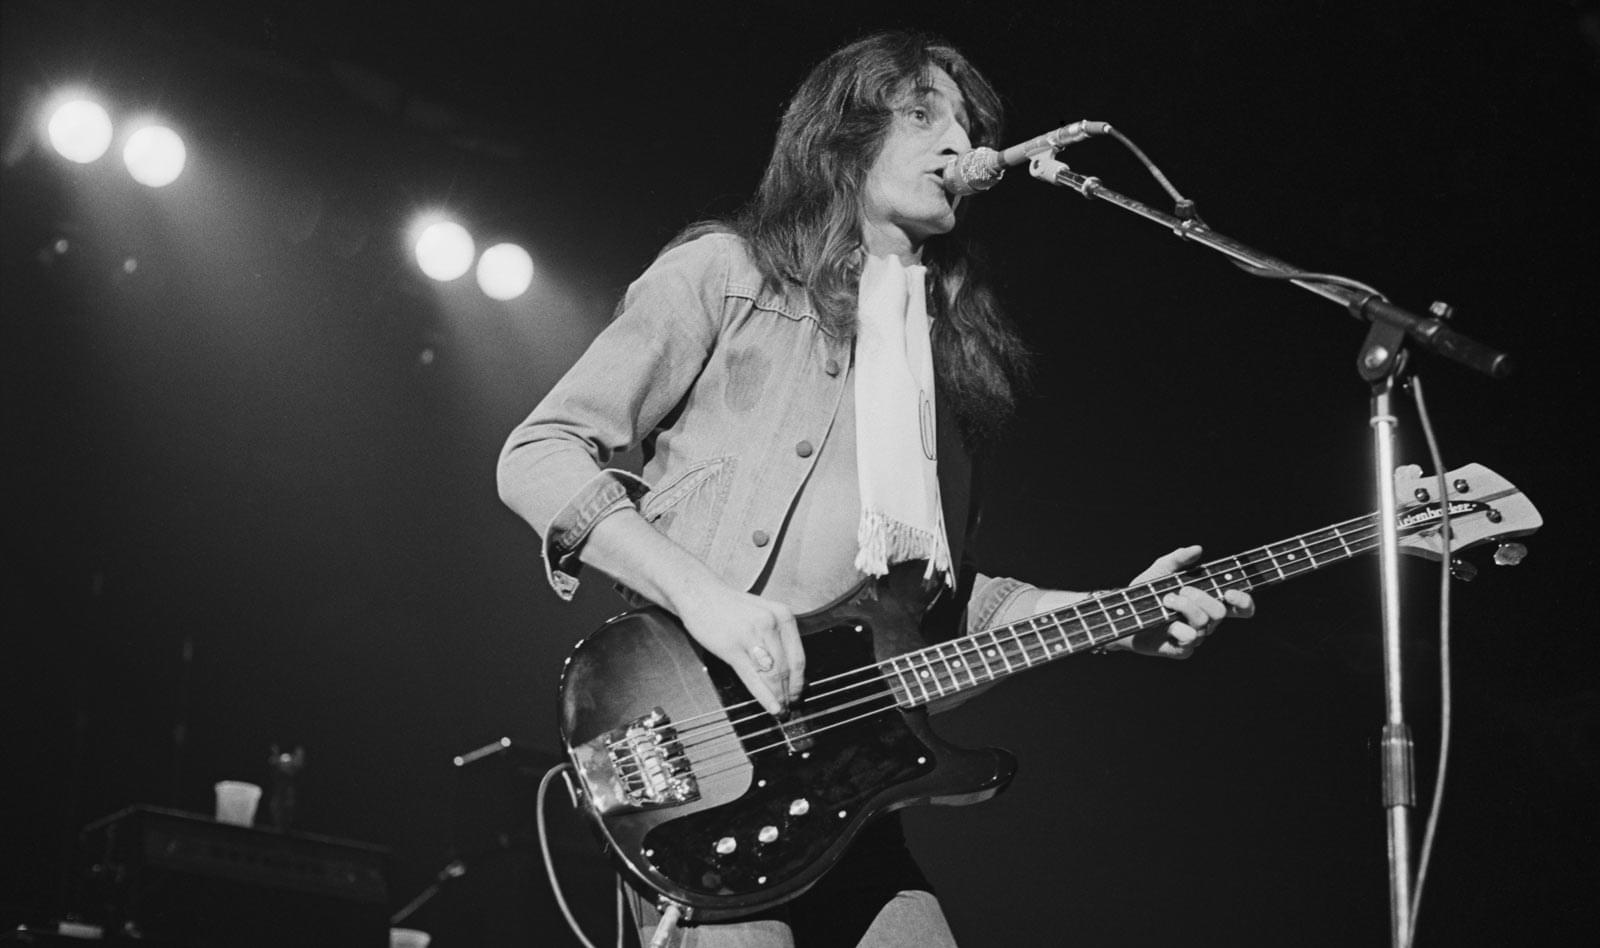 After Trending on Twitter, Rush’s Geddy Lee Confirms He’s Not Dead